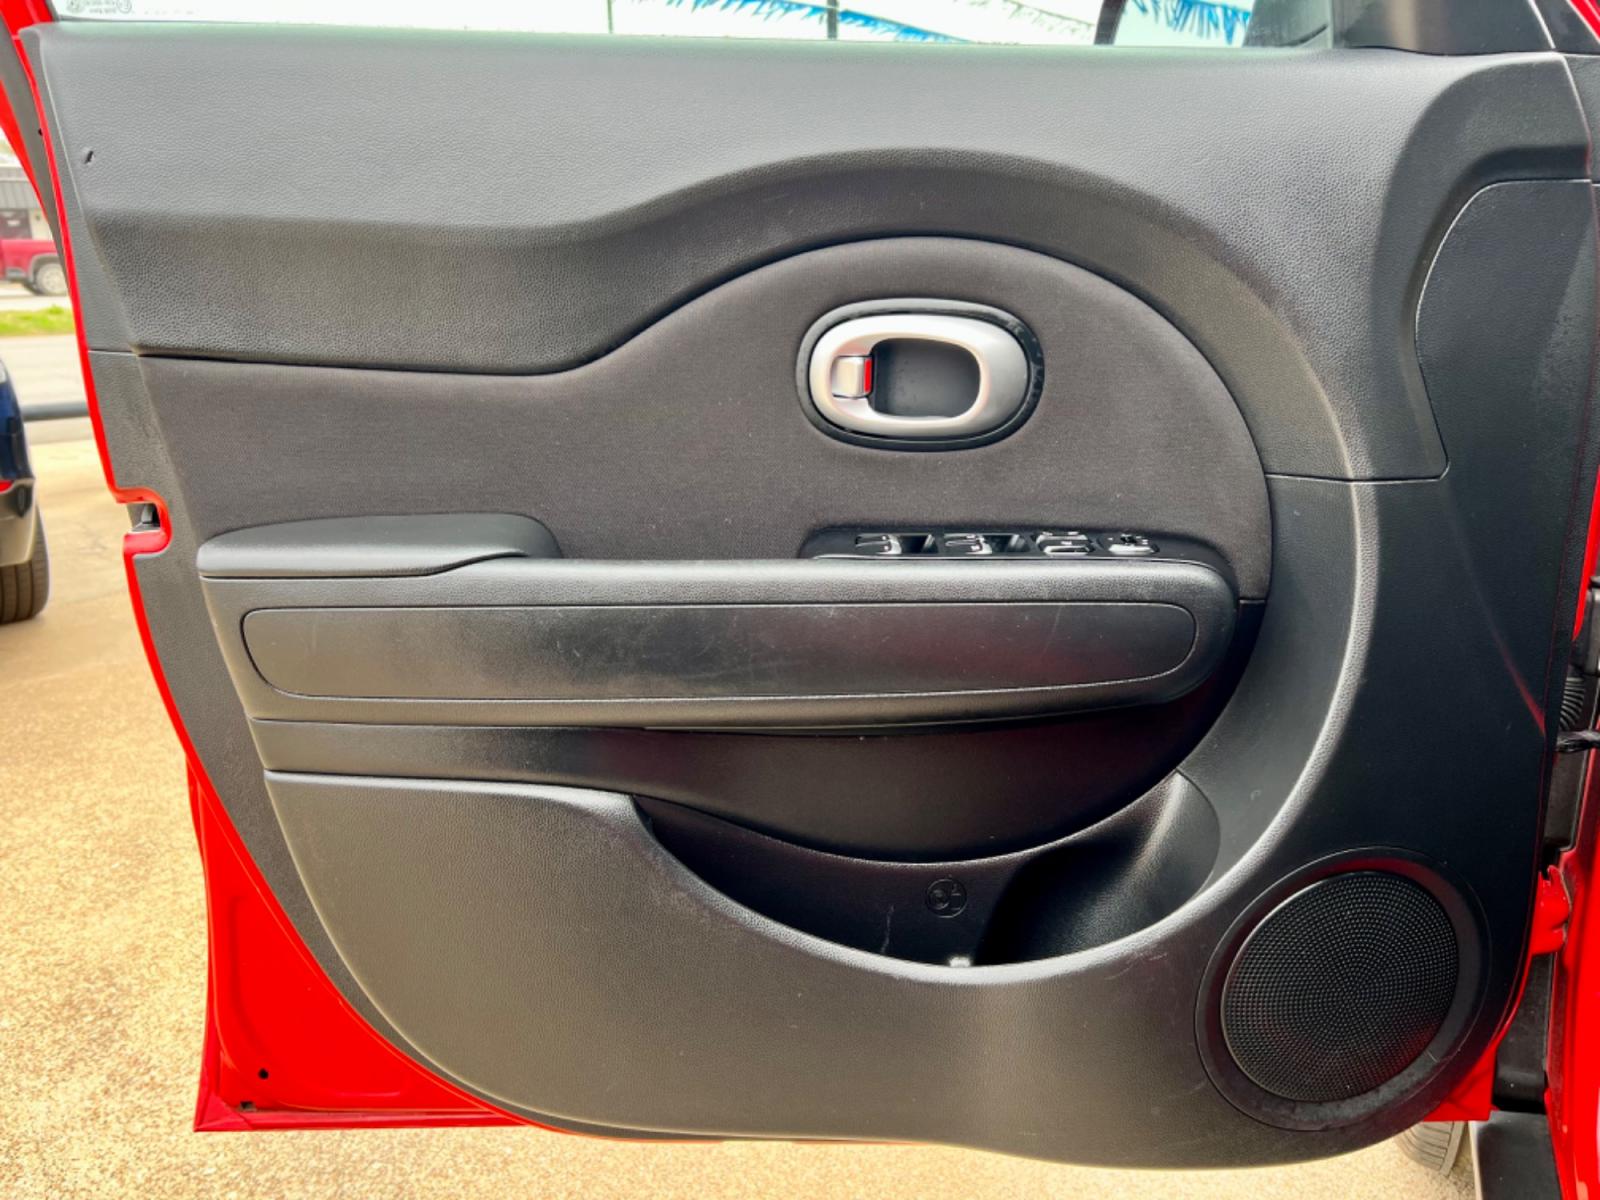 2018 RED KIA SOUL (KNDJP3A51J7) , located at 5900 E. Lancaster Ave., Fort Worth, TX, 76112, (817) 457-5456, 0.000000, 0.000000 - This is a 2018 KIA SOUL 4 DR WAGON that is in excellent condition. The interior is clean with no rips or tears or stains. All power windows, door locks and seats. Ice cold AC for those hot Texas summer days. It is equipped with a CD player, AM/FM radio, AUX port, Bluetooth connectivity and Sirius XM - Photo #9